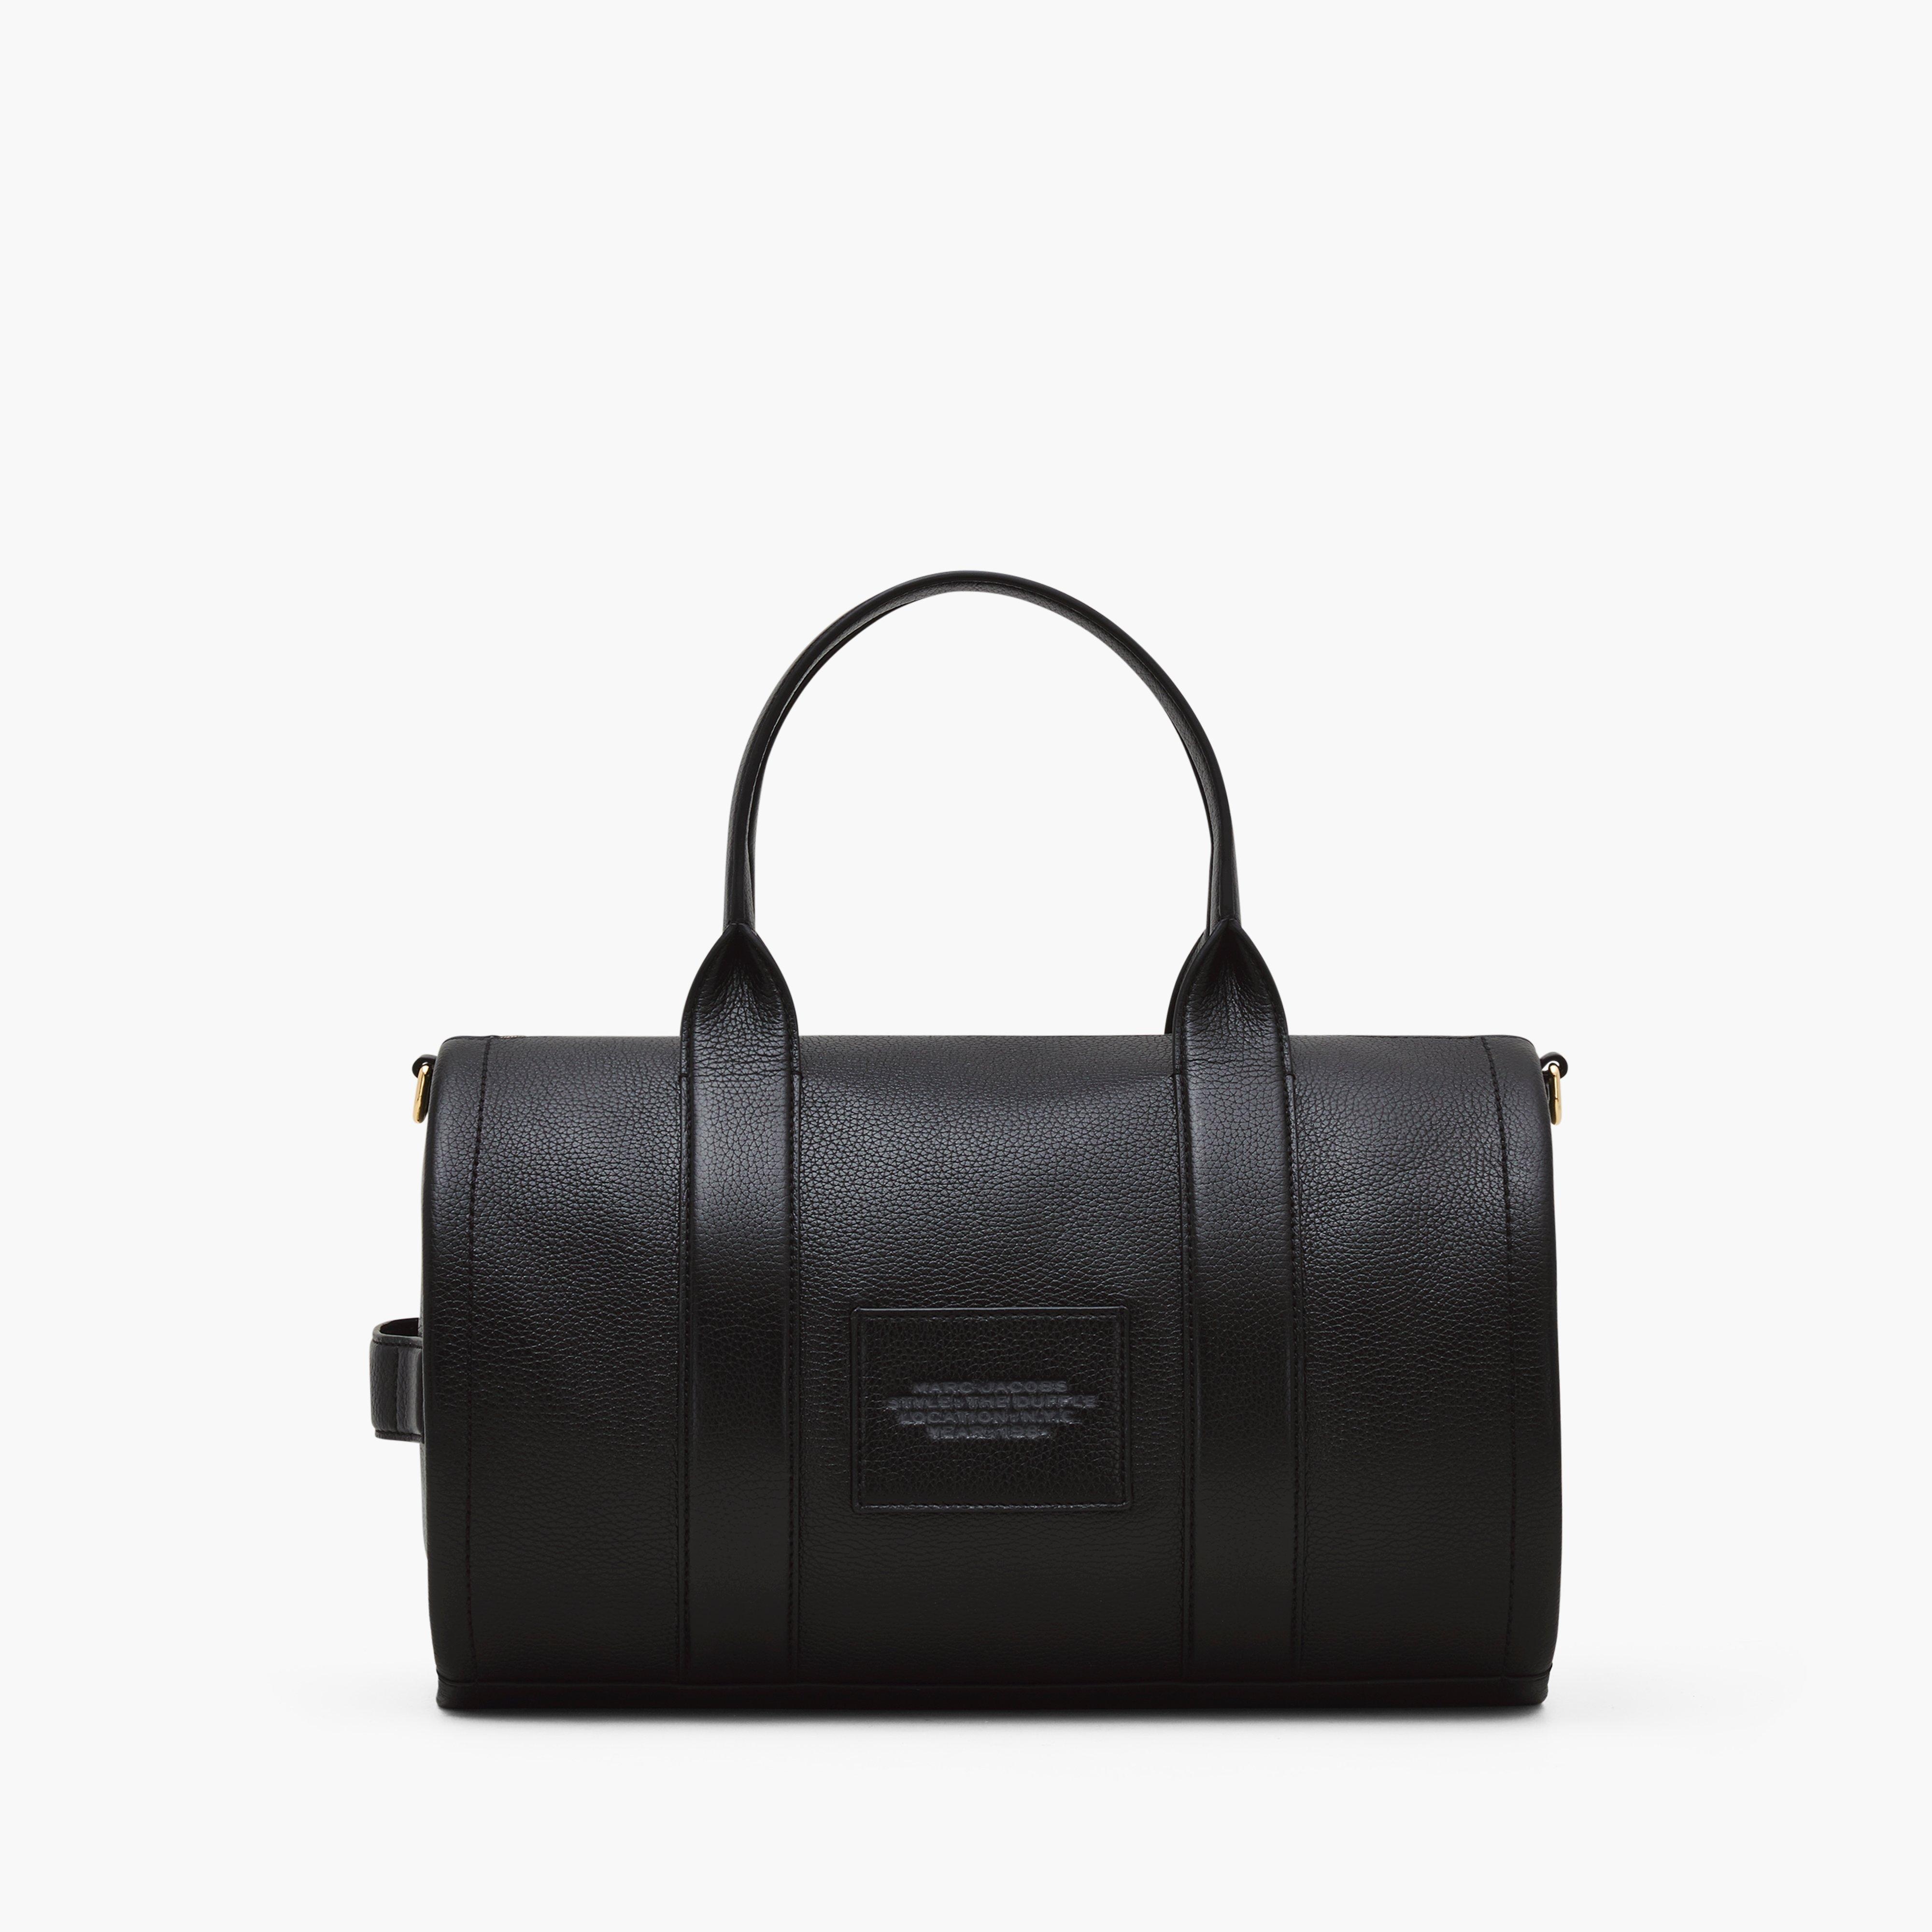 THE LEATHER LARGE DUFFLE BAG - 4